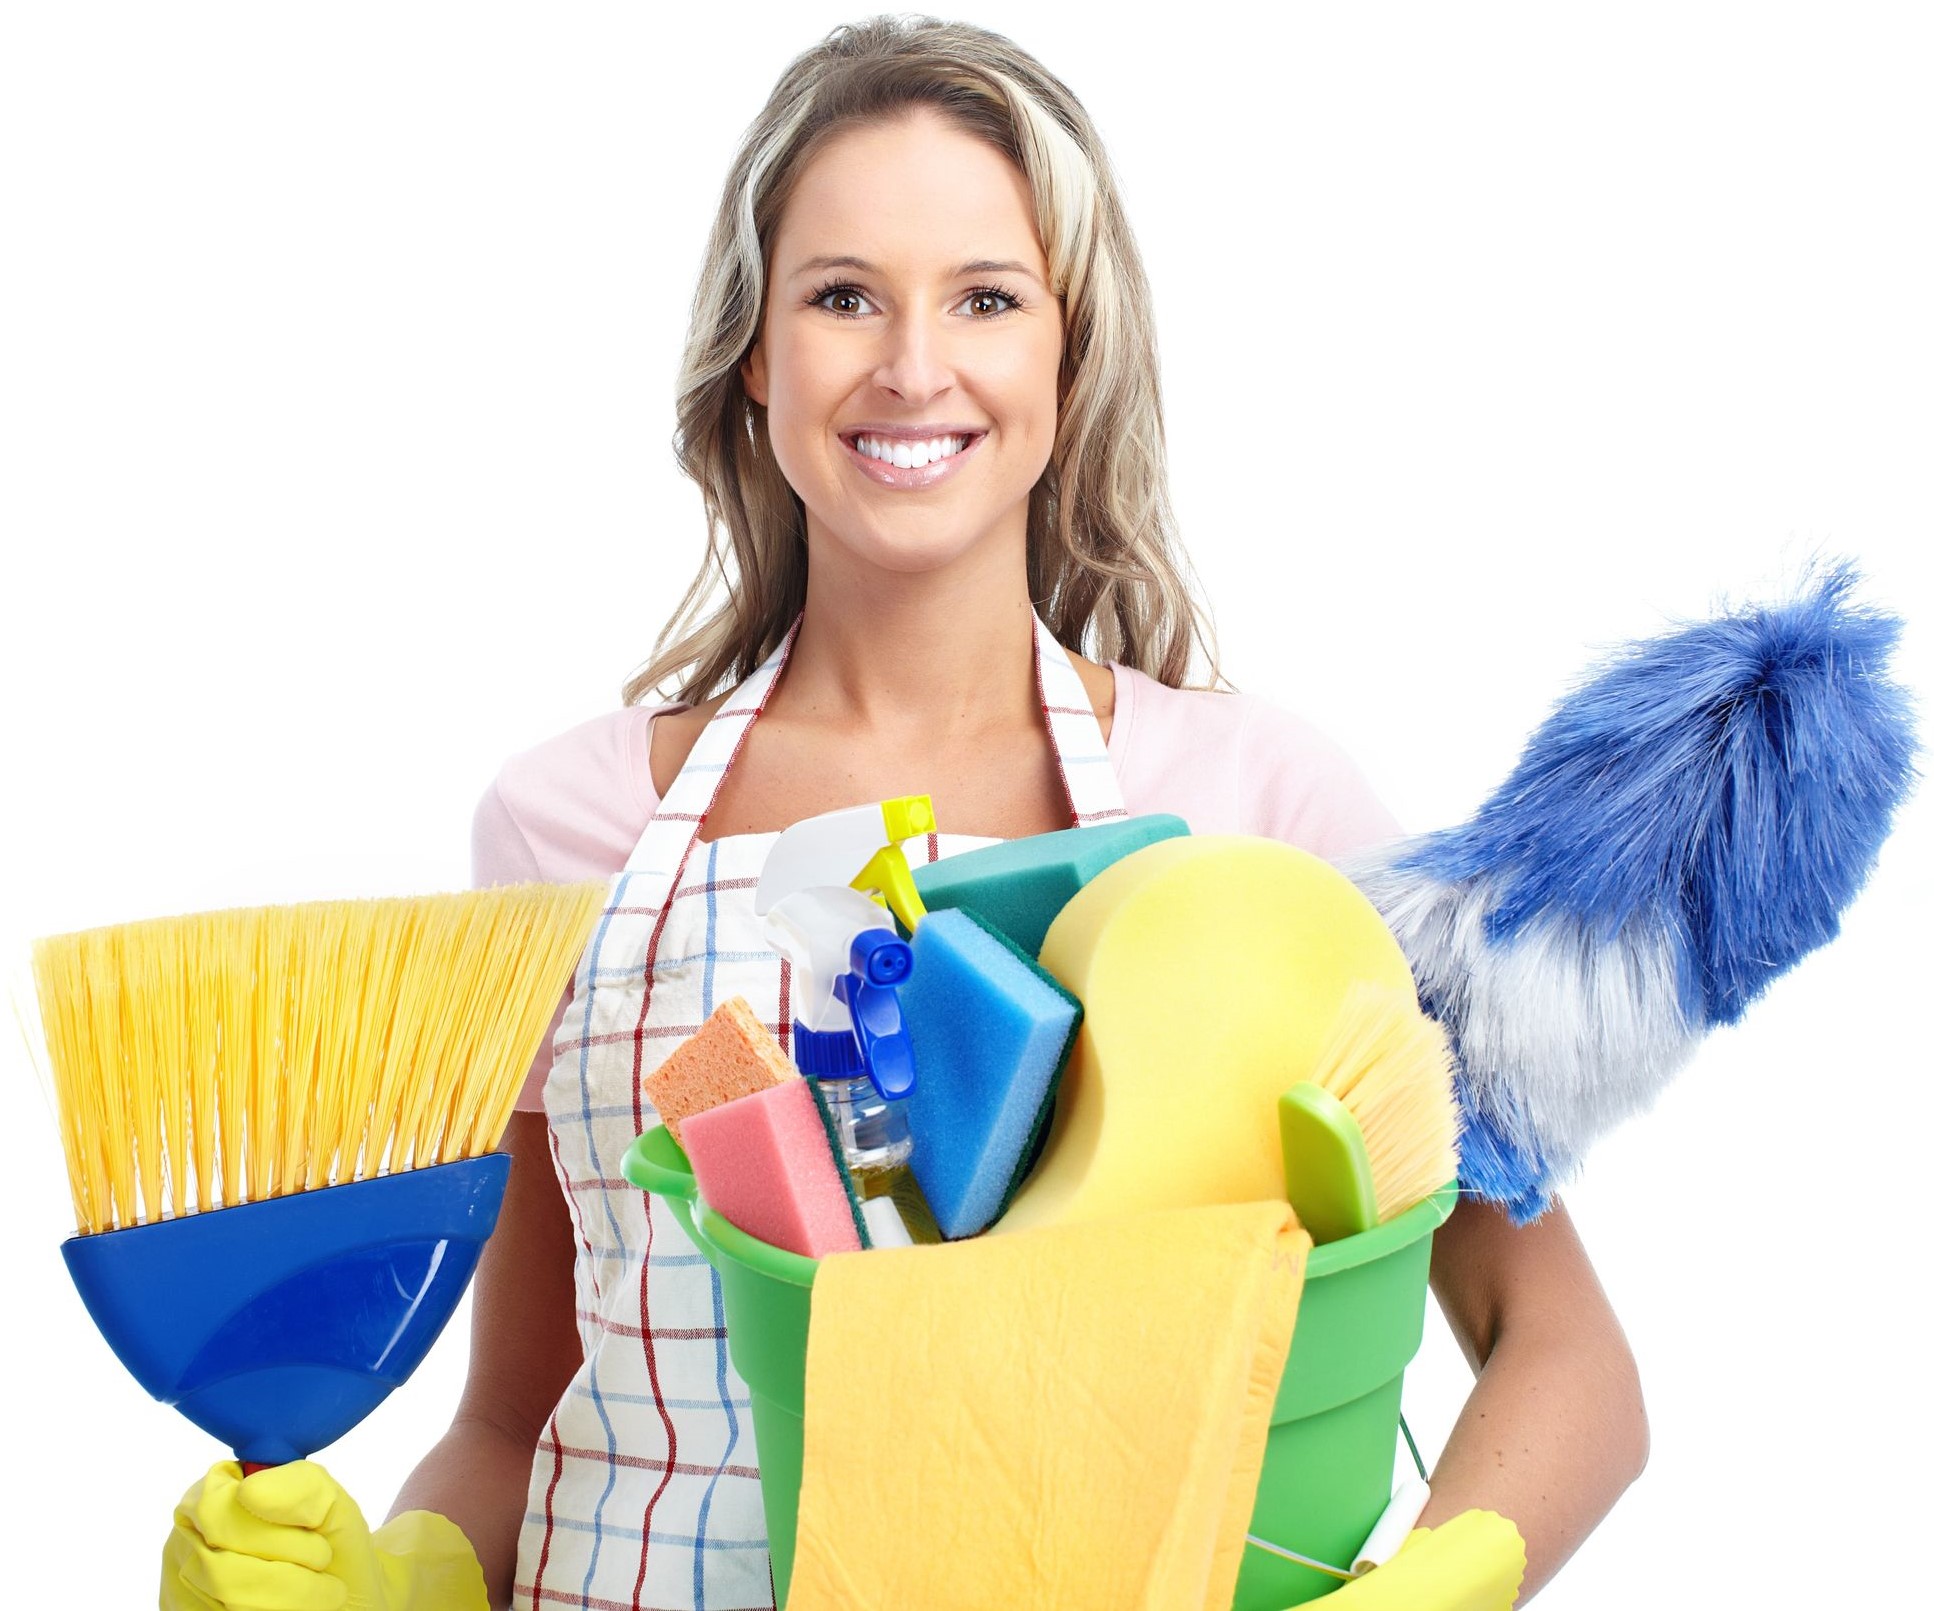 lady with blonde hair and apron holding a bucket of cleaning supplies and a broom